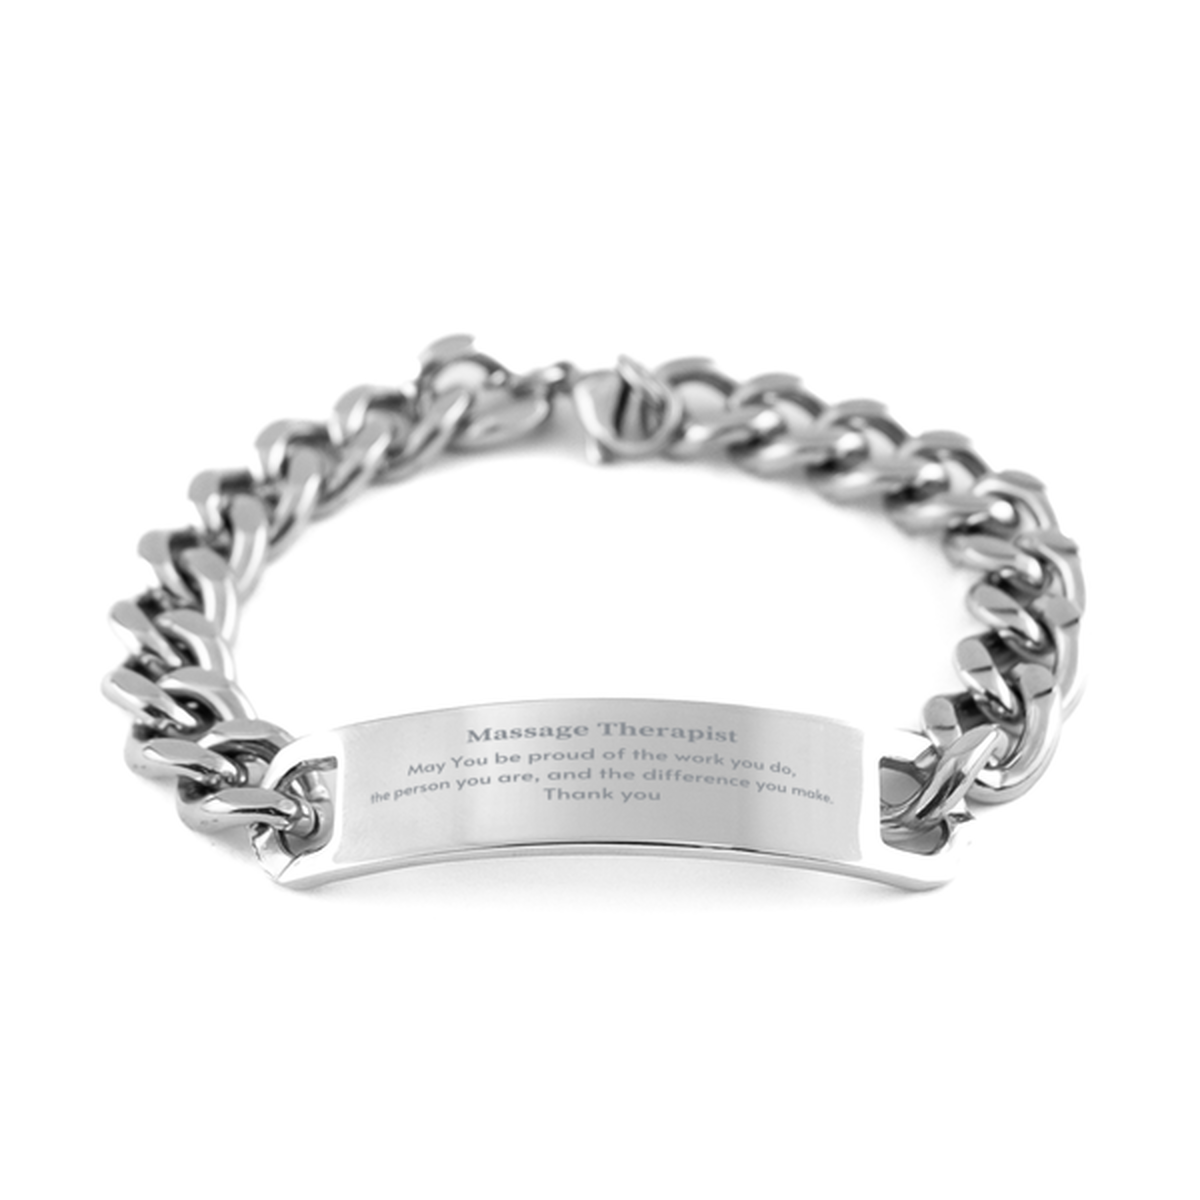 Heartwarming Cuban Chain Stainless Steel Bracelet Retirement Coworkers Gifts for Massage Therapist, Massage Therapist May You be proud of the work you do, the person you are Gifts for Boss Men Women Friends